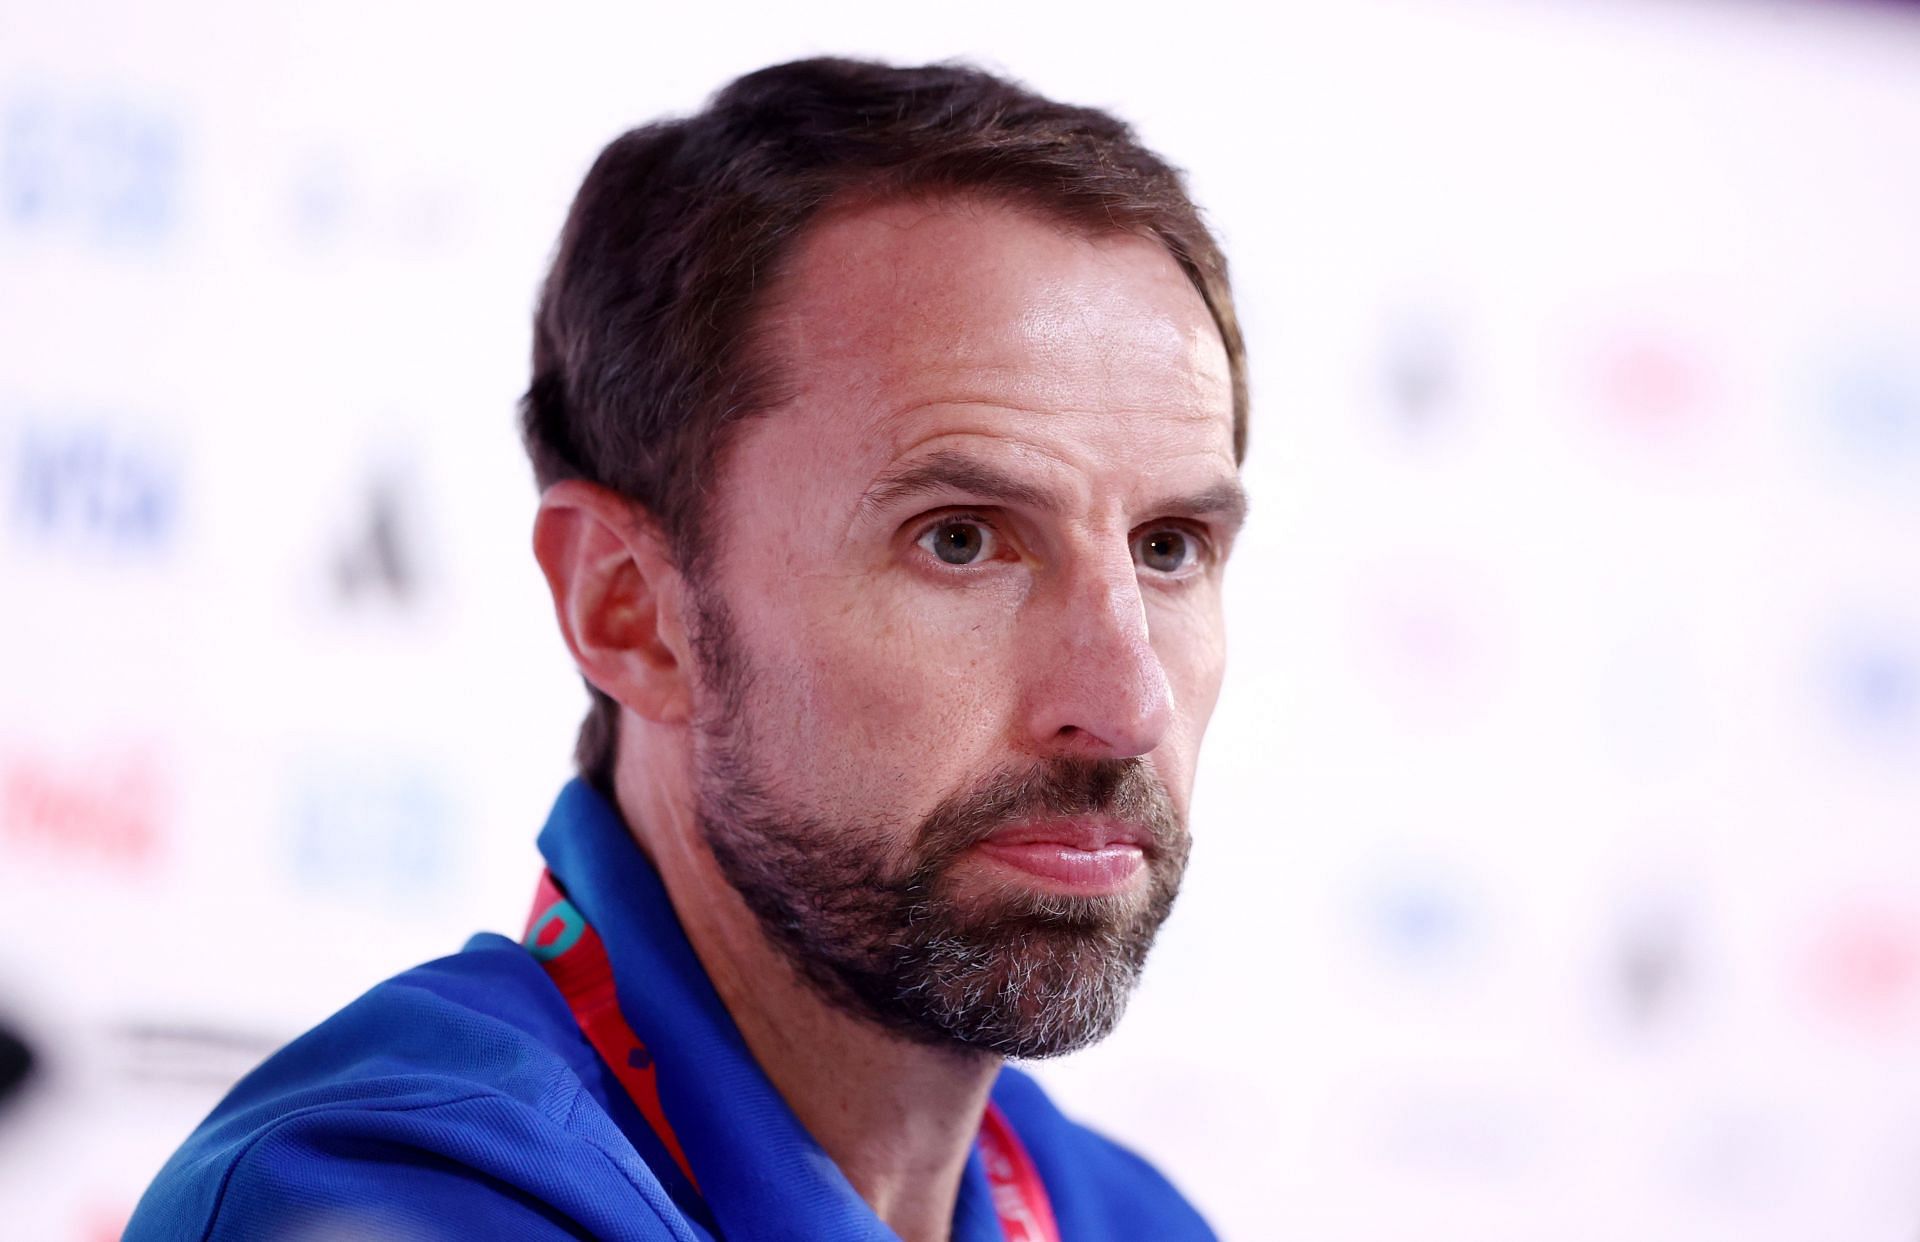 Southgate could be on the cusp of glory with his side.